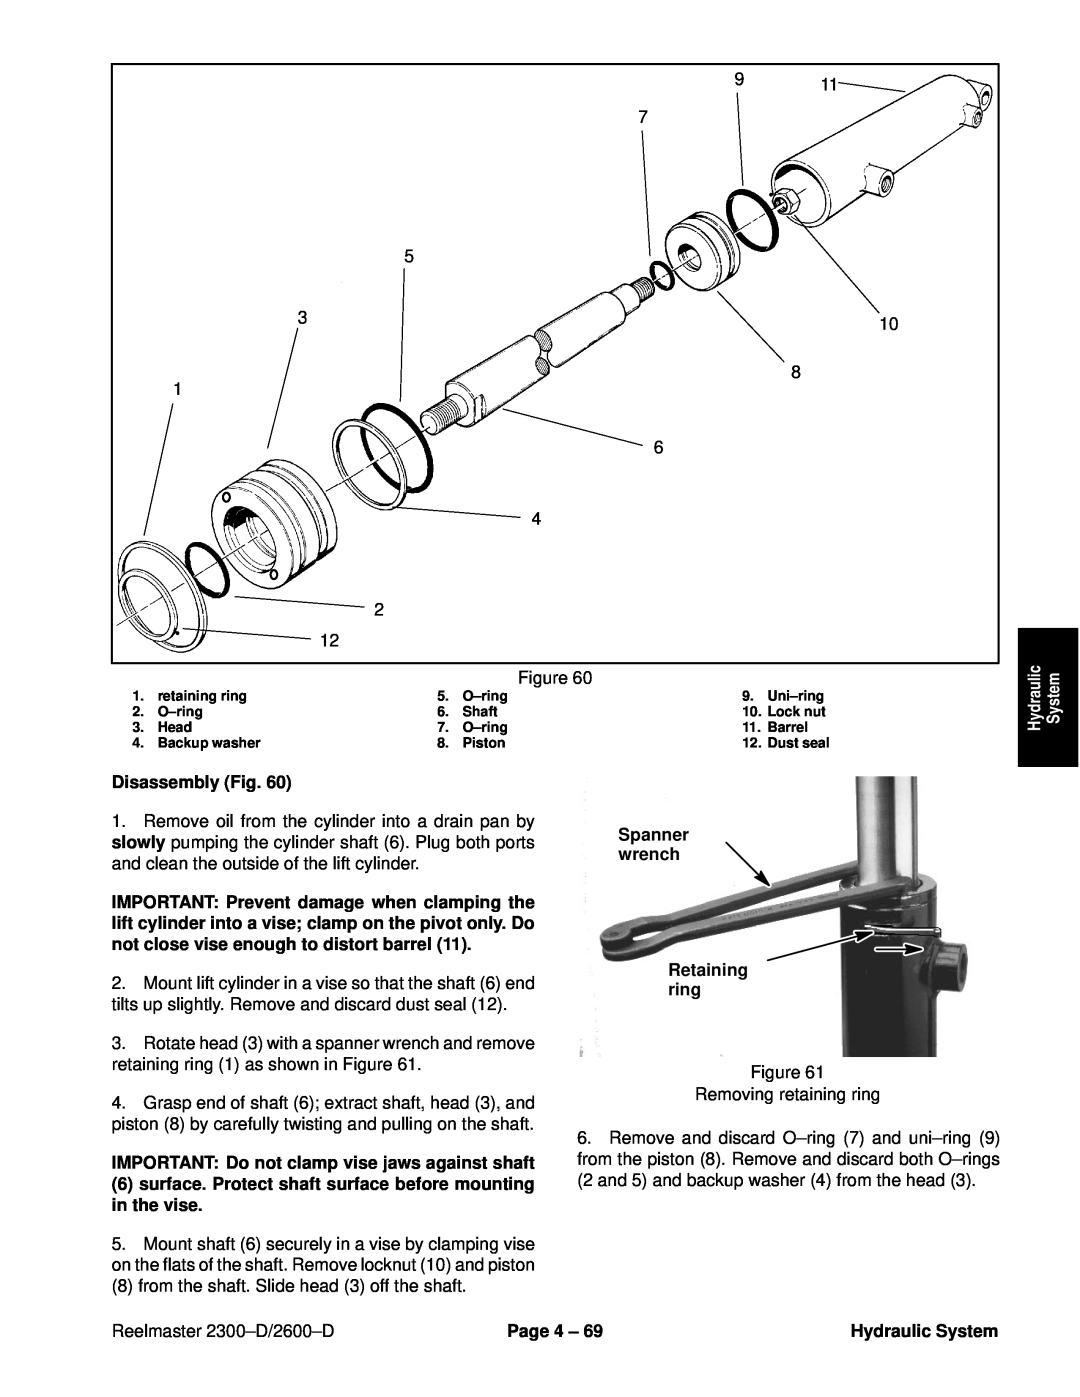 Toro 2600D Disassembly Fig, IMPORTANT Do not clamp vise jaws against shaft, Spanner wrench Retaining ring, Page 4 ± 